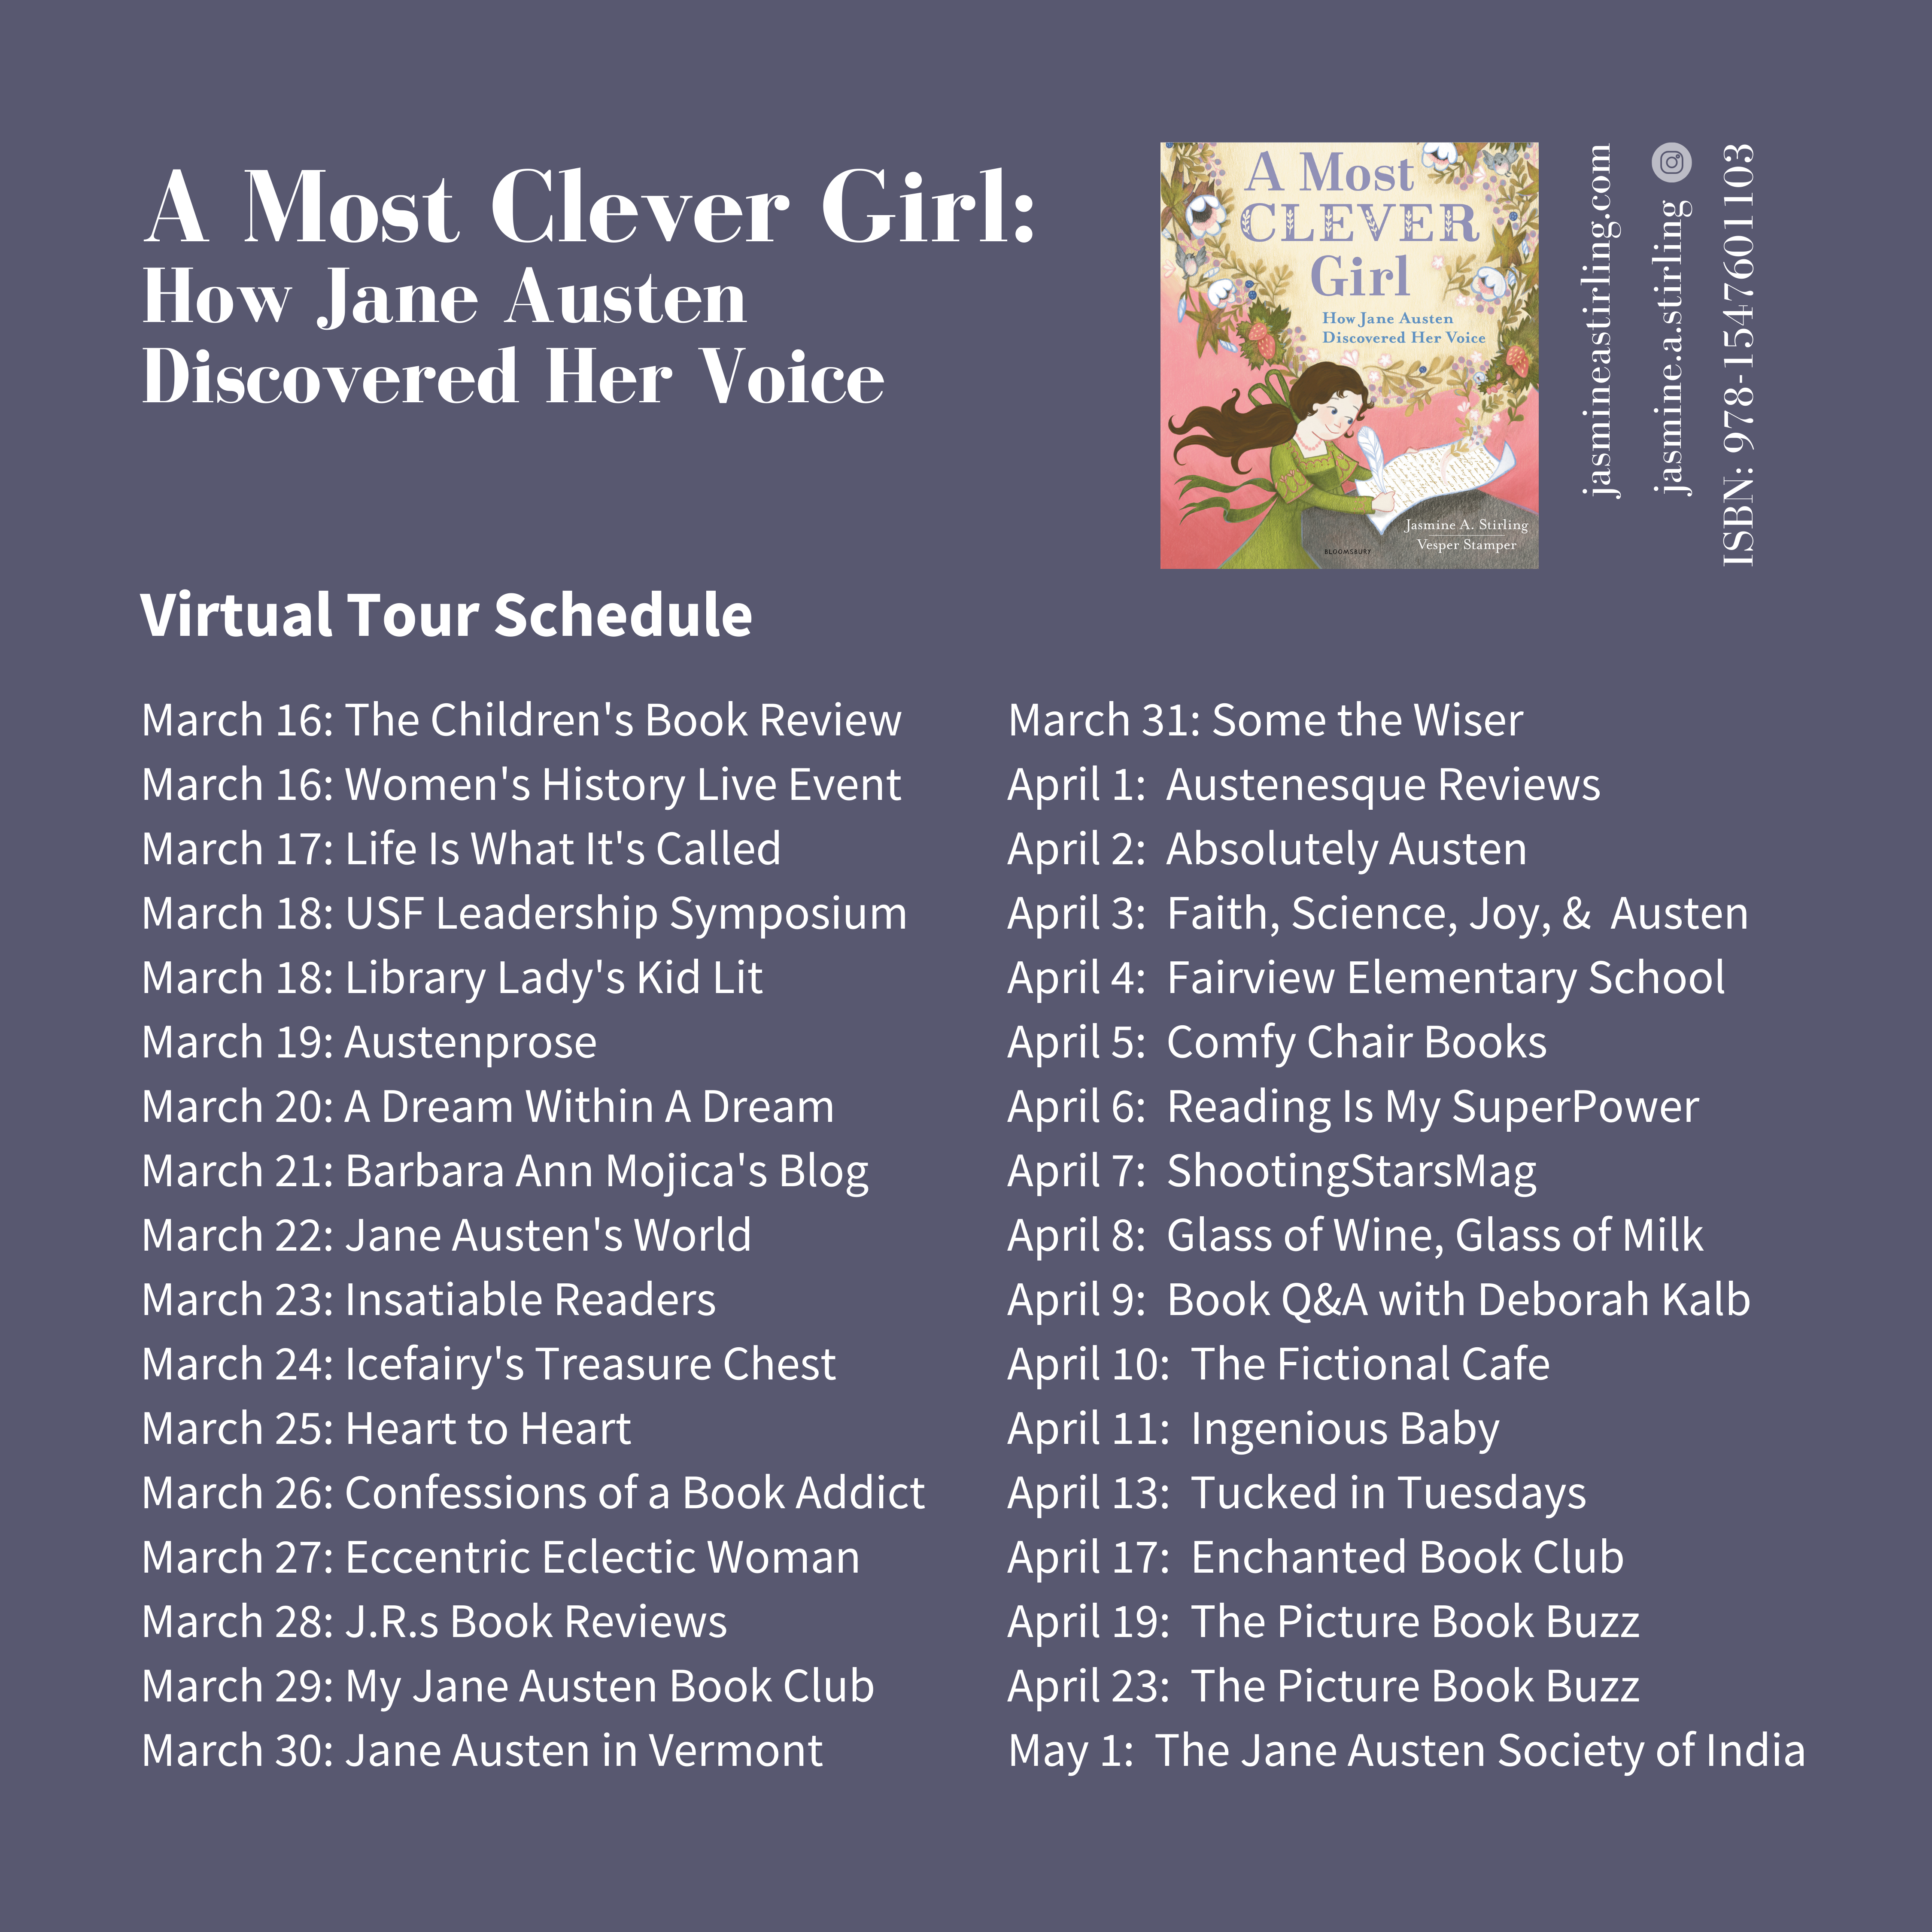 A Most Clever Girl Tour schedule